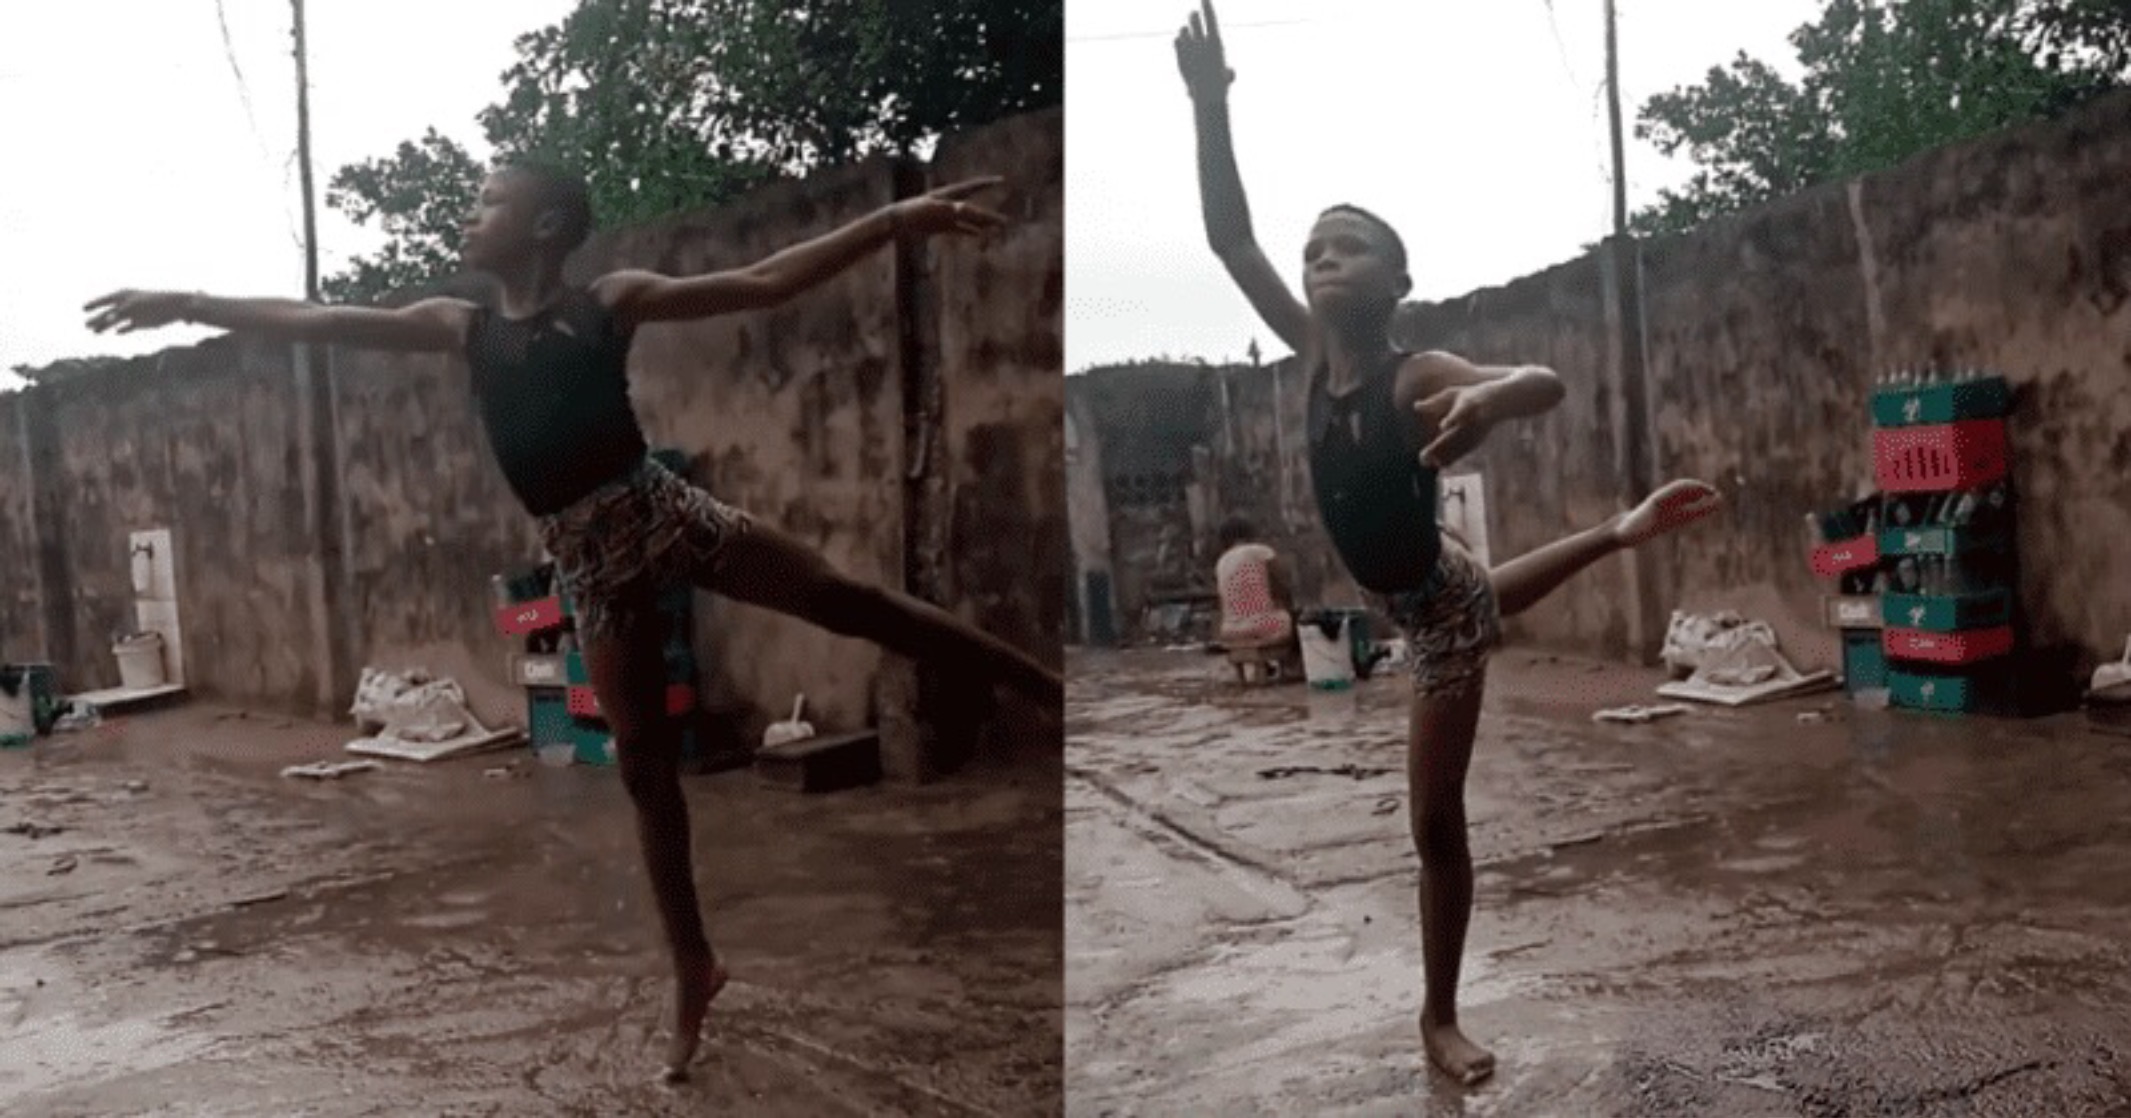 The 11-year-old has been learning to dance at the Leap of Dance Academy in his hometown of Badagry on the Nigerian coast, and the boy clearly has talent.